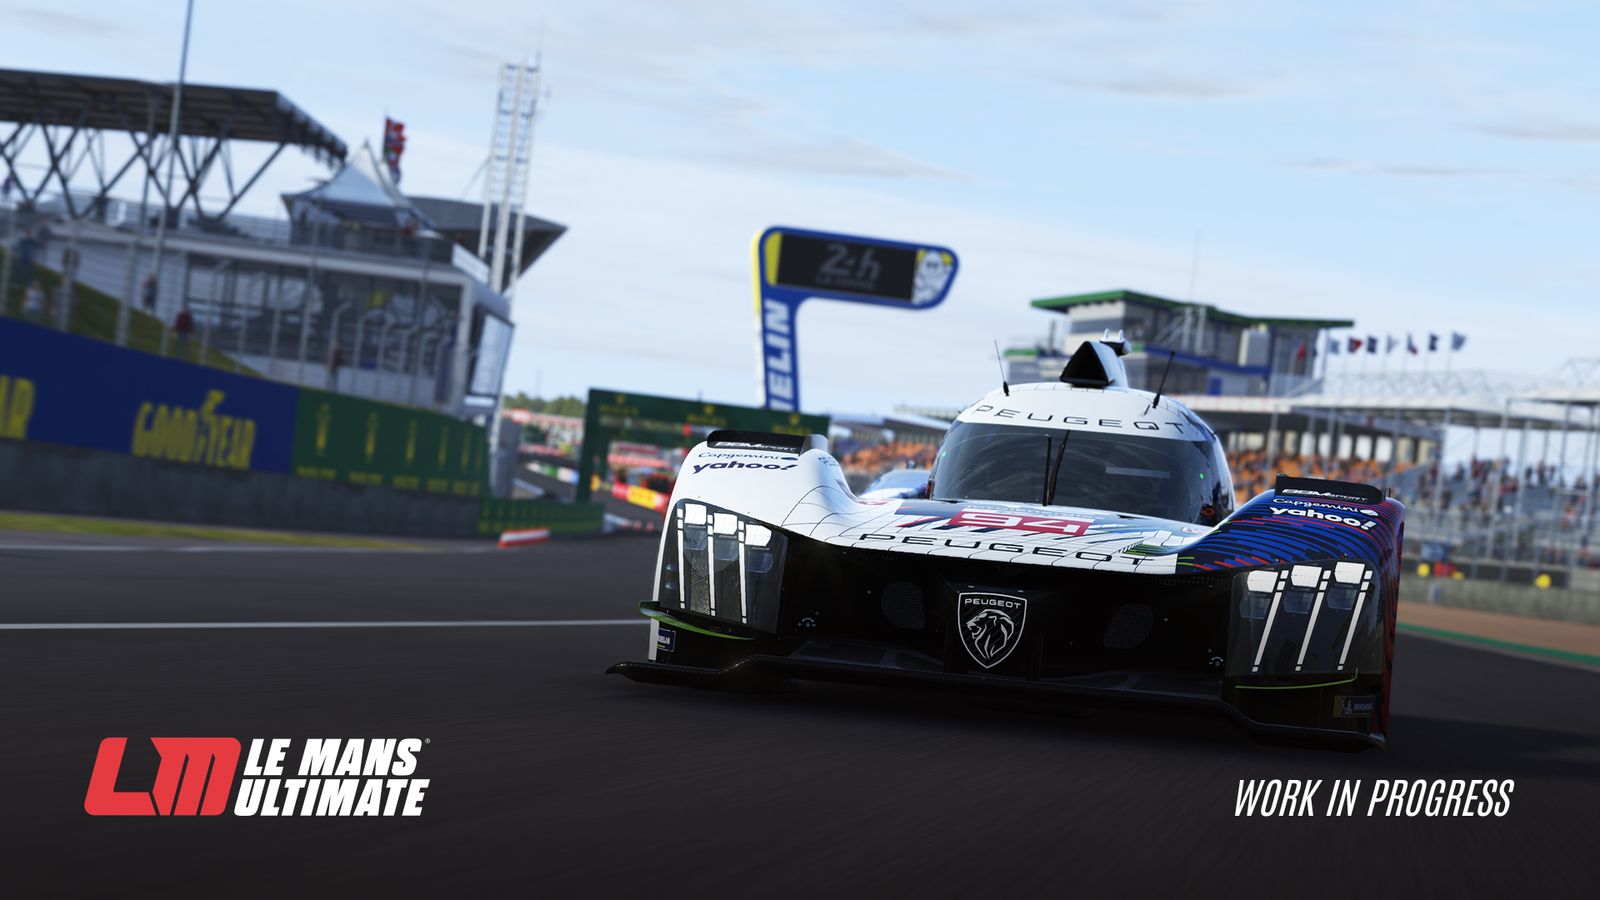 Le Mans Ultimate Delayed as First Trailer Drops